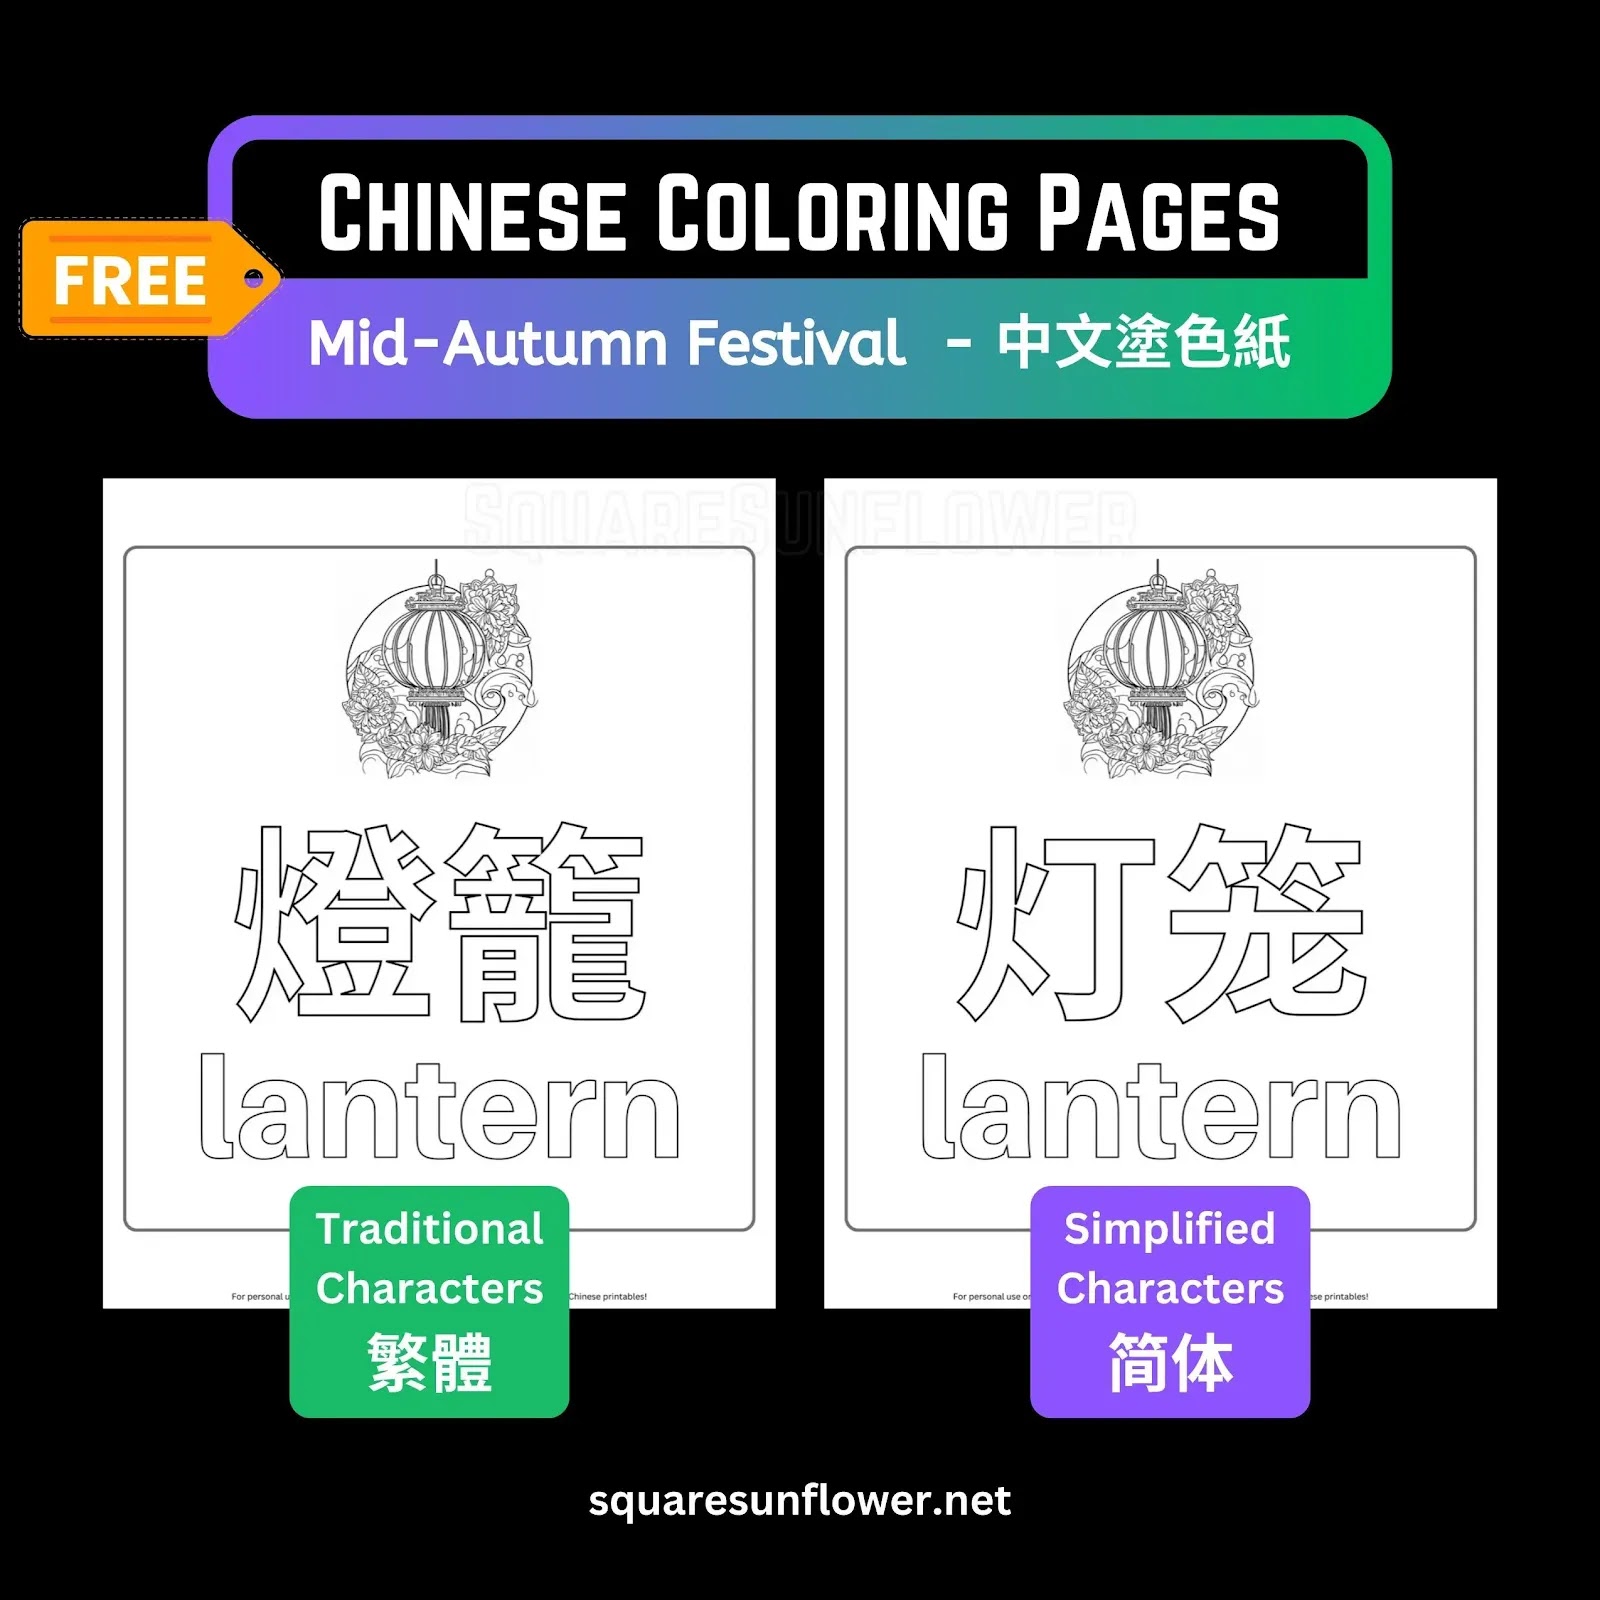 Chinese coloring pages for young kids - Mid-Autumn Festival words